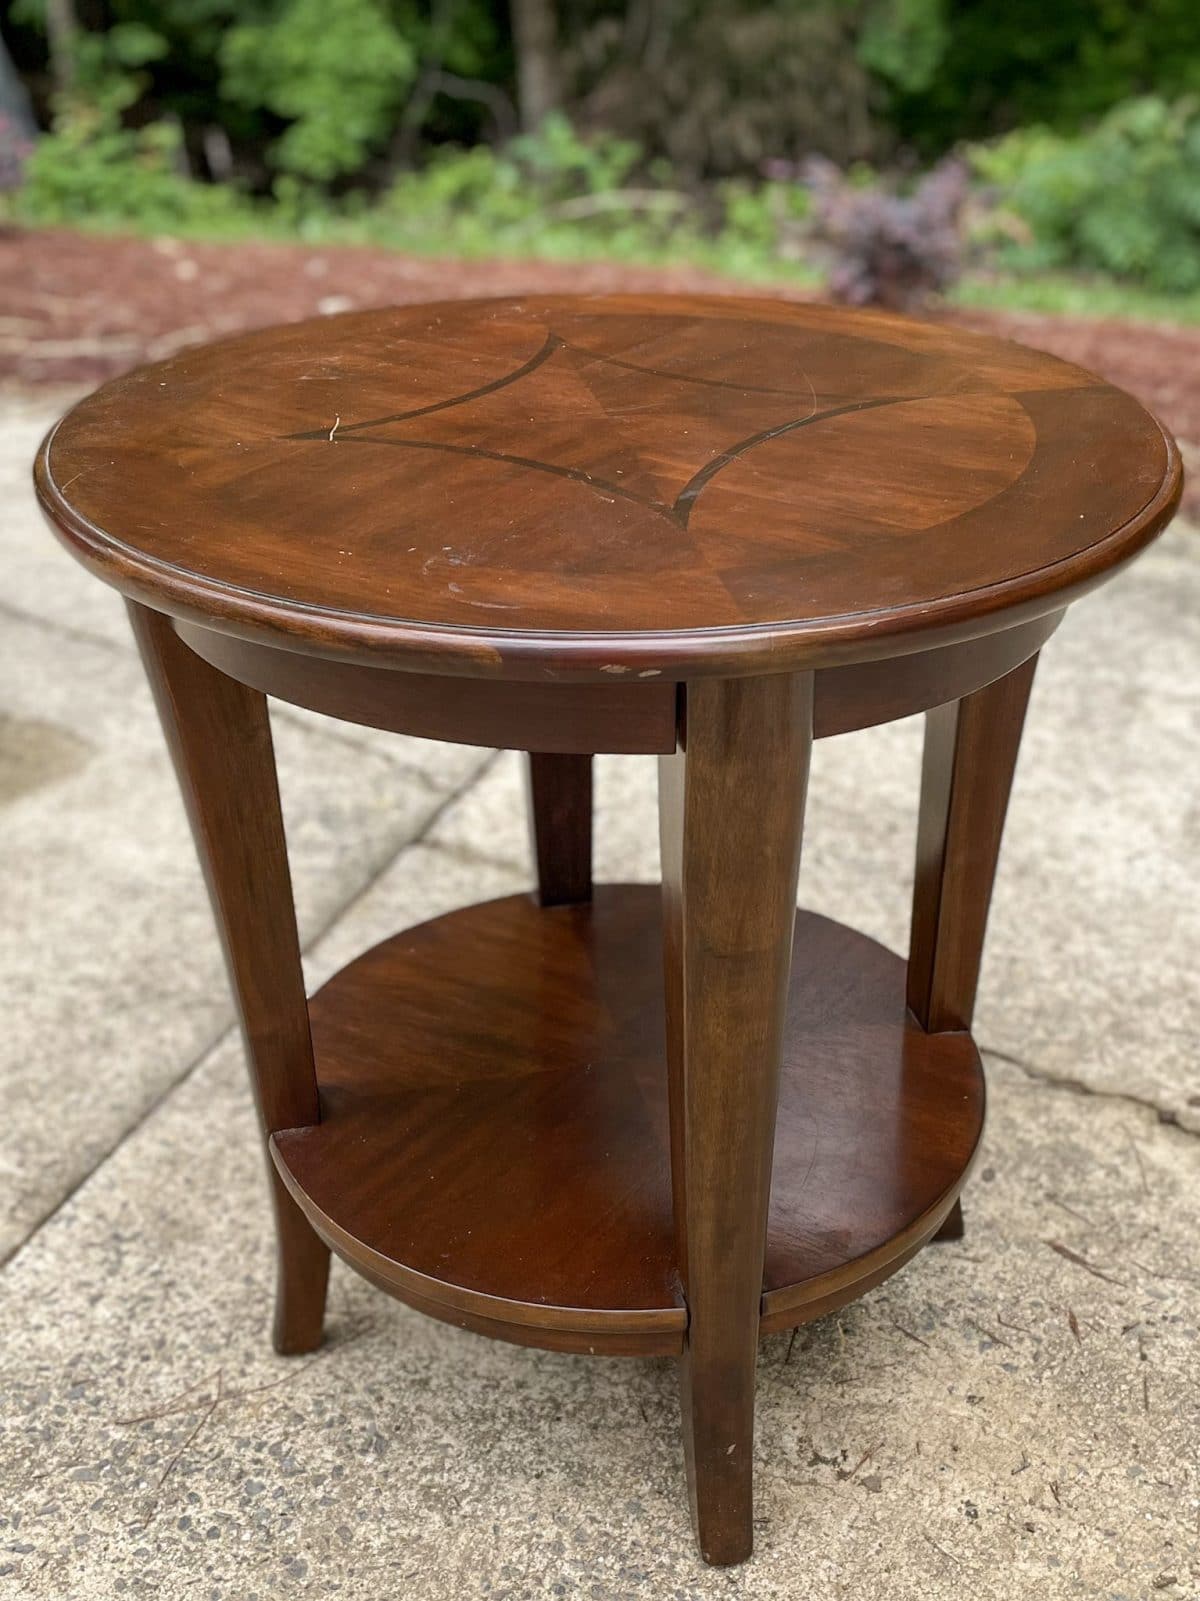 round cherry end table sitting in driveway